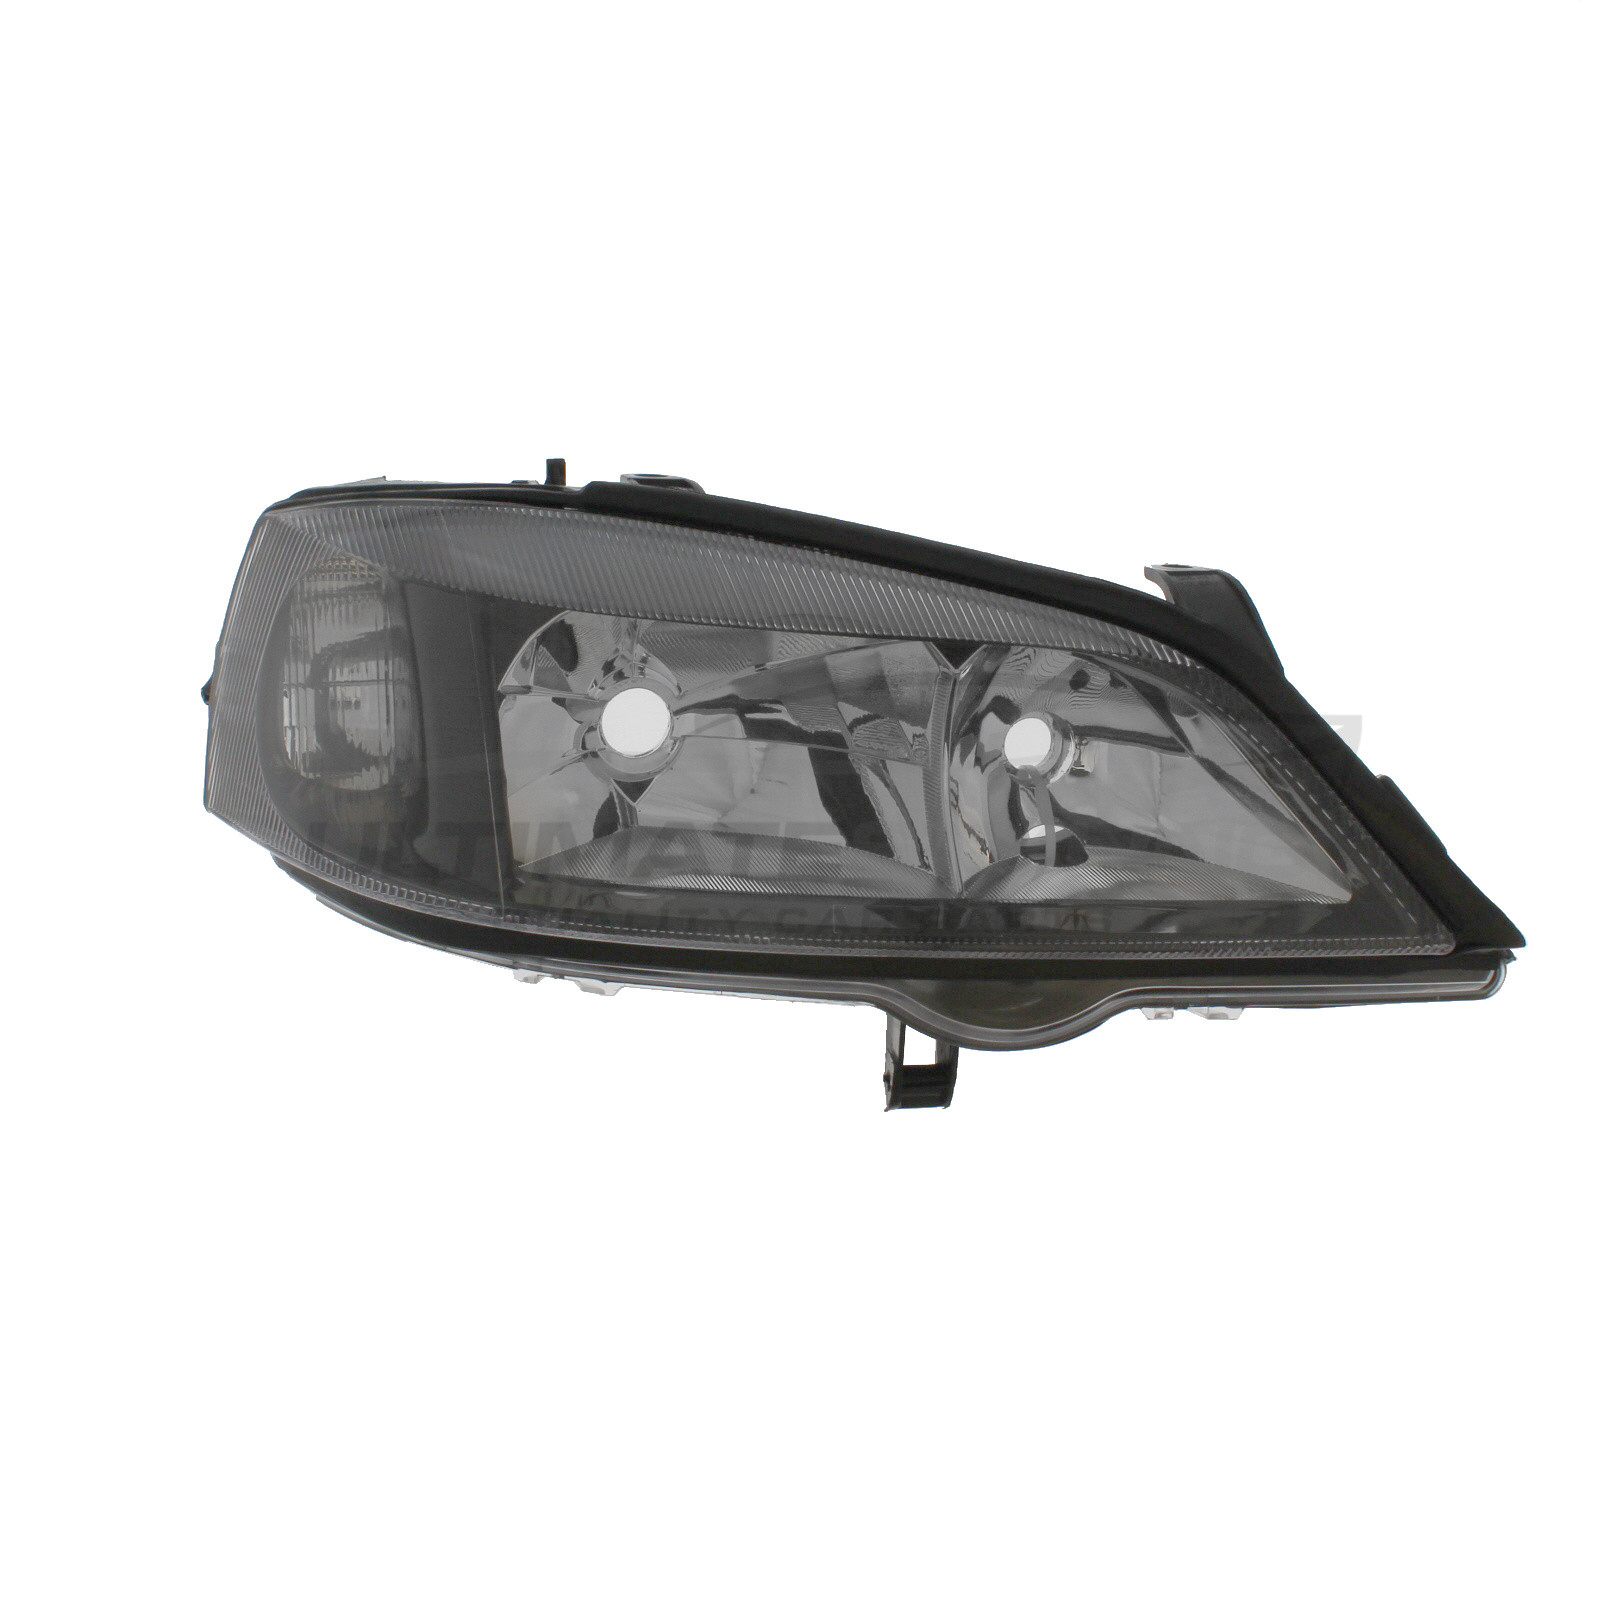 Vauxhall Astra G 1998-2004 Halogen, Electric Without Motor, Headlight / Headlamp with Black Surround Drivers Side (RH)